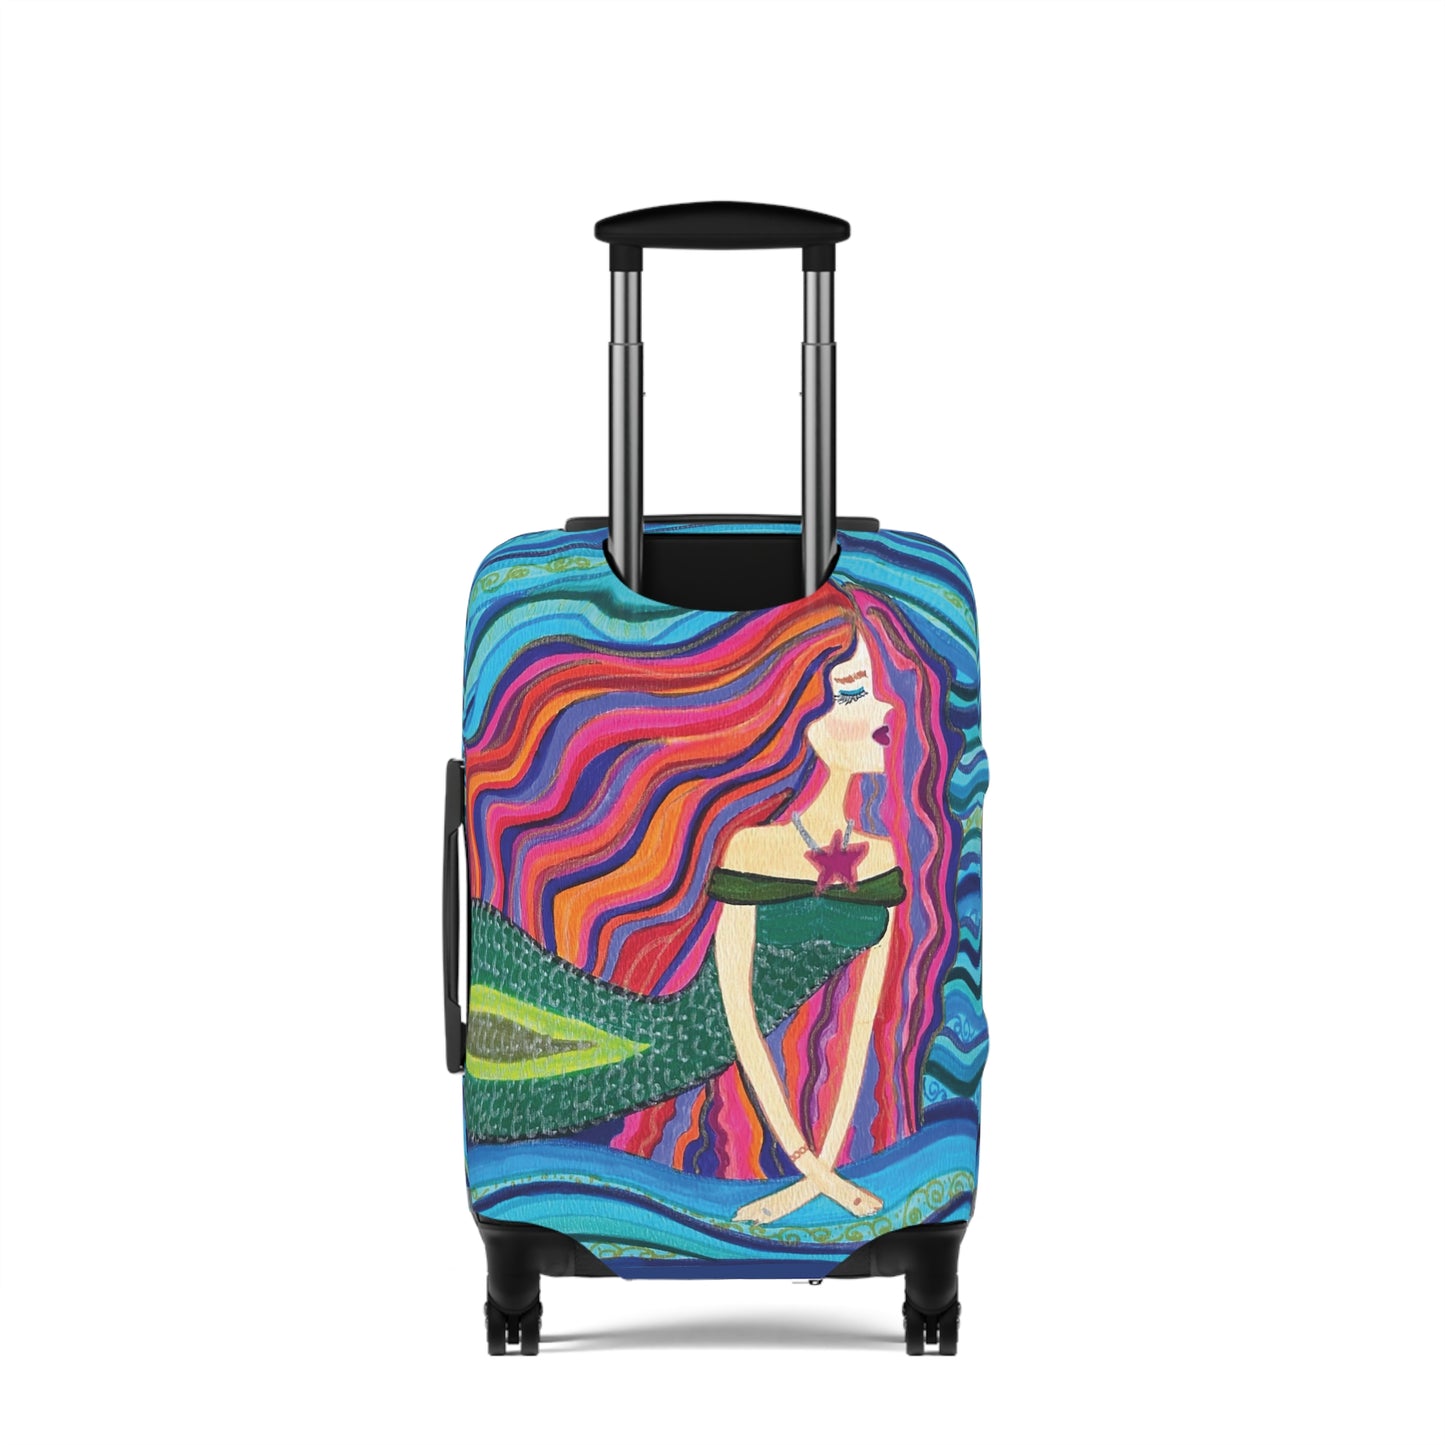 Meditating MERMAID Luggage Cover - Perfect Gift For Mermaid And Meditation Lovers